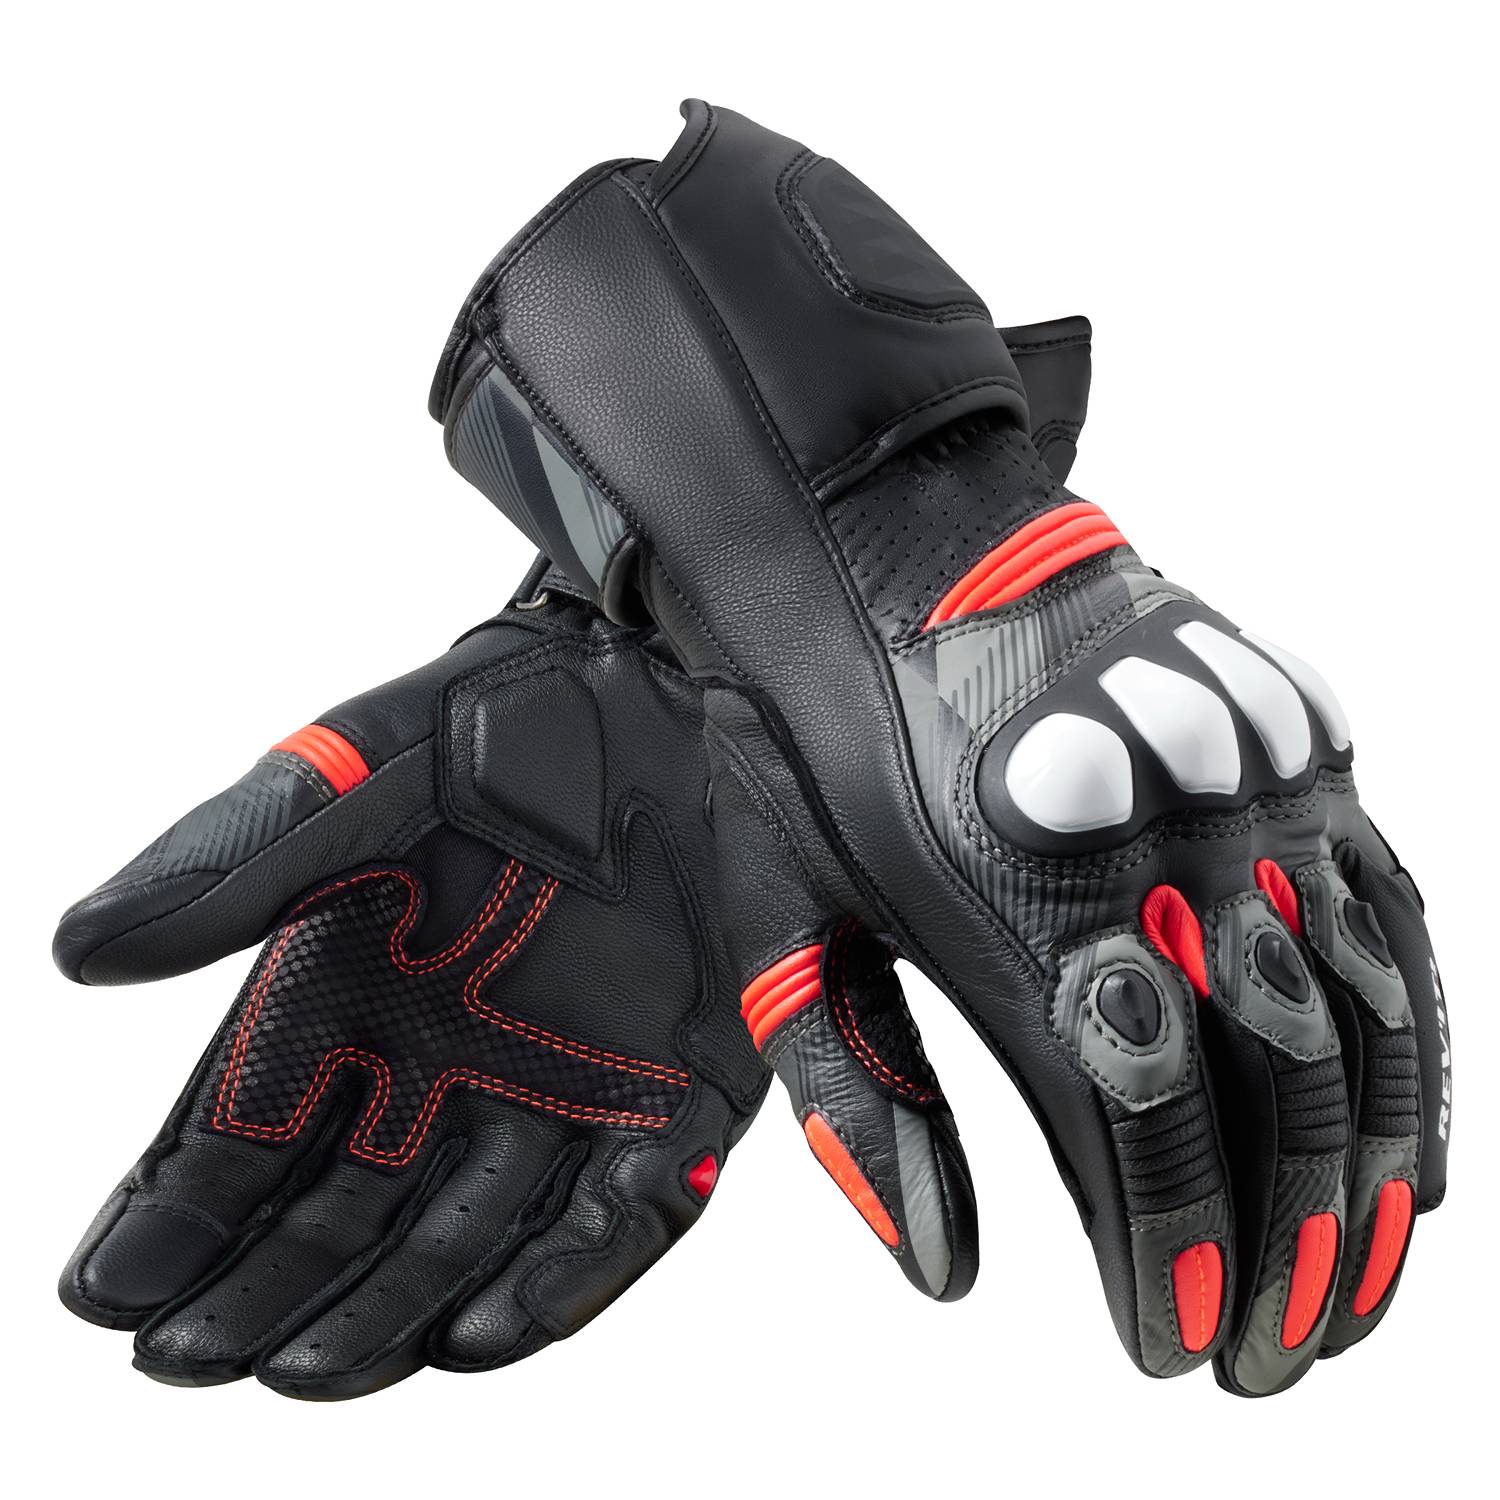 Image of REV'IT! League 2 Gloves Black Neon Red Size L ID 8700001360746